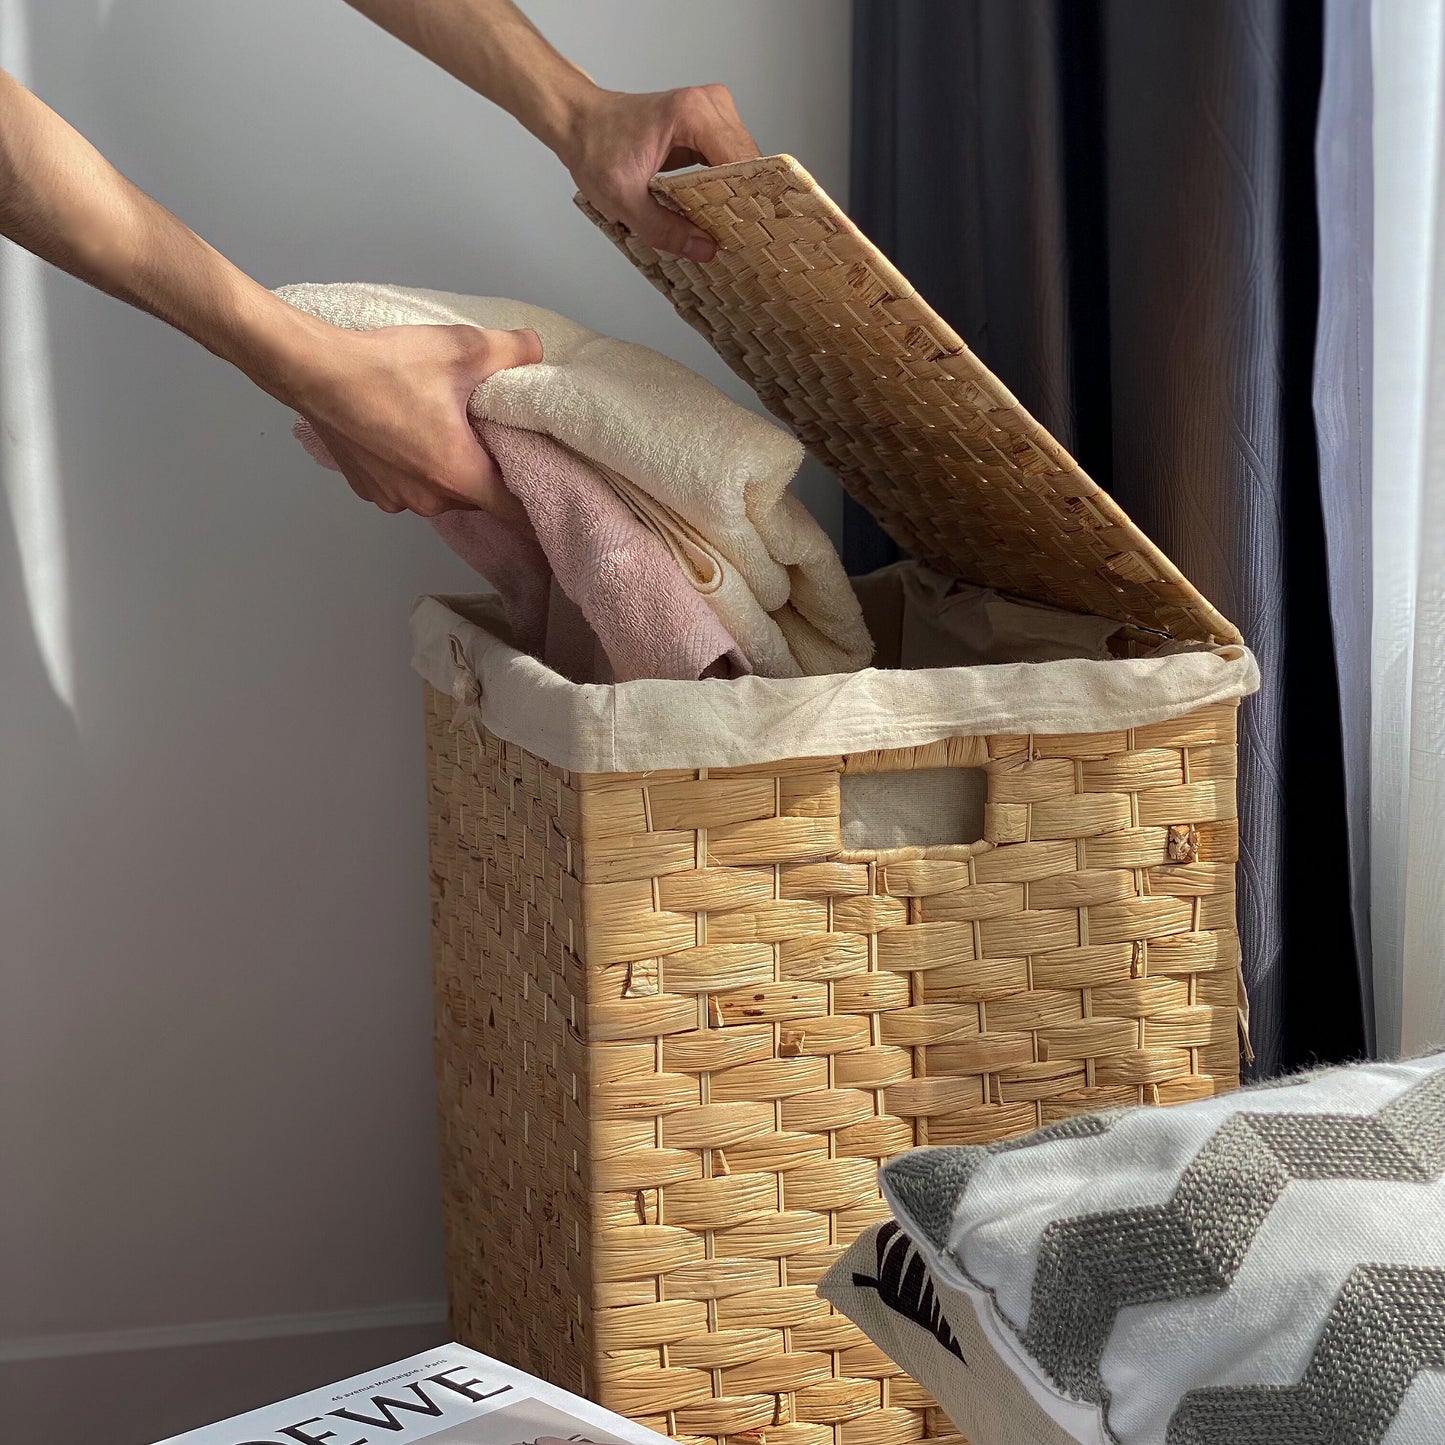 Basket with lid for clothes and pillows